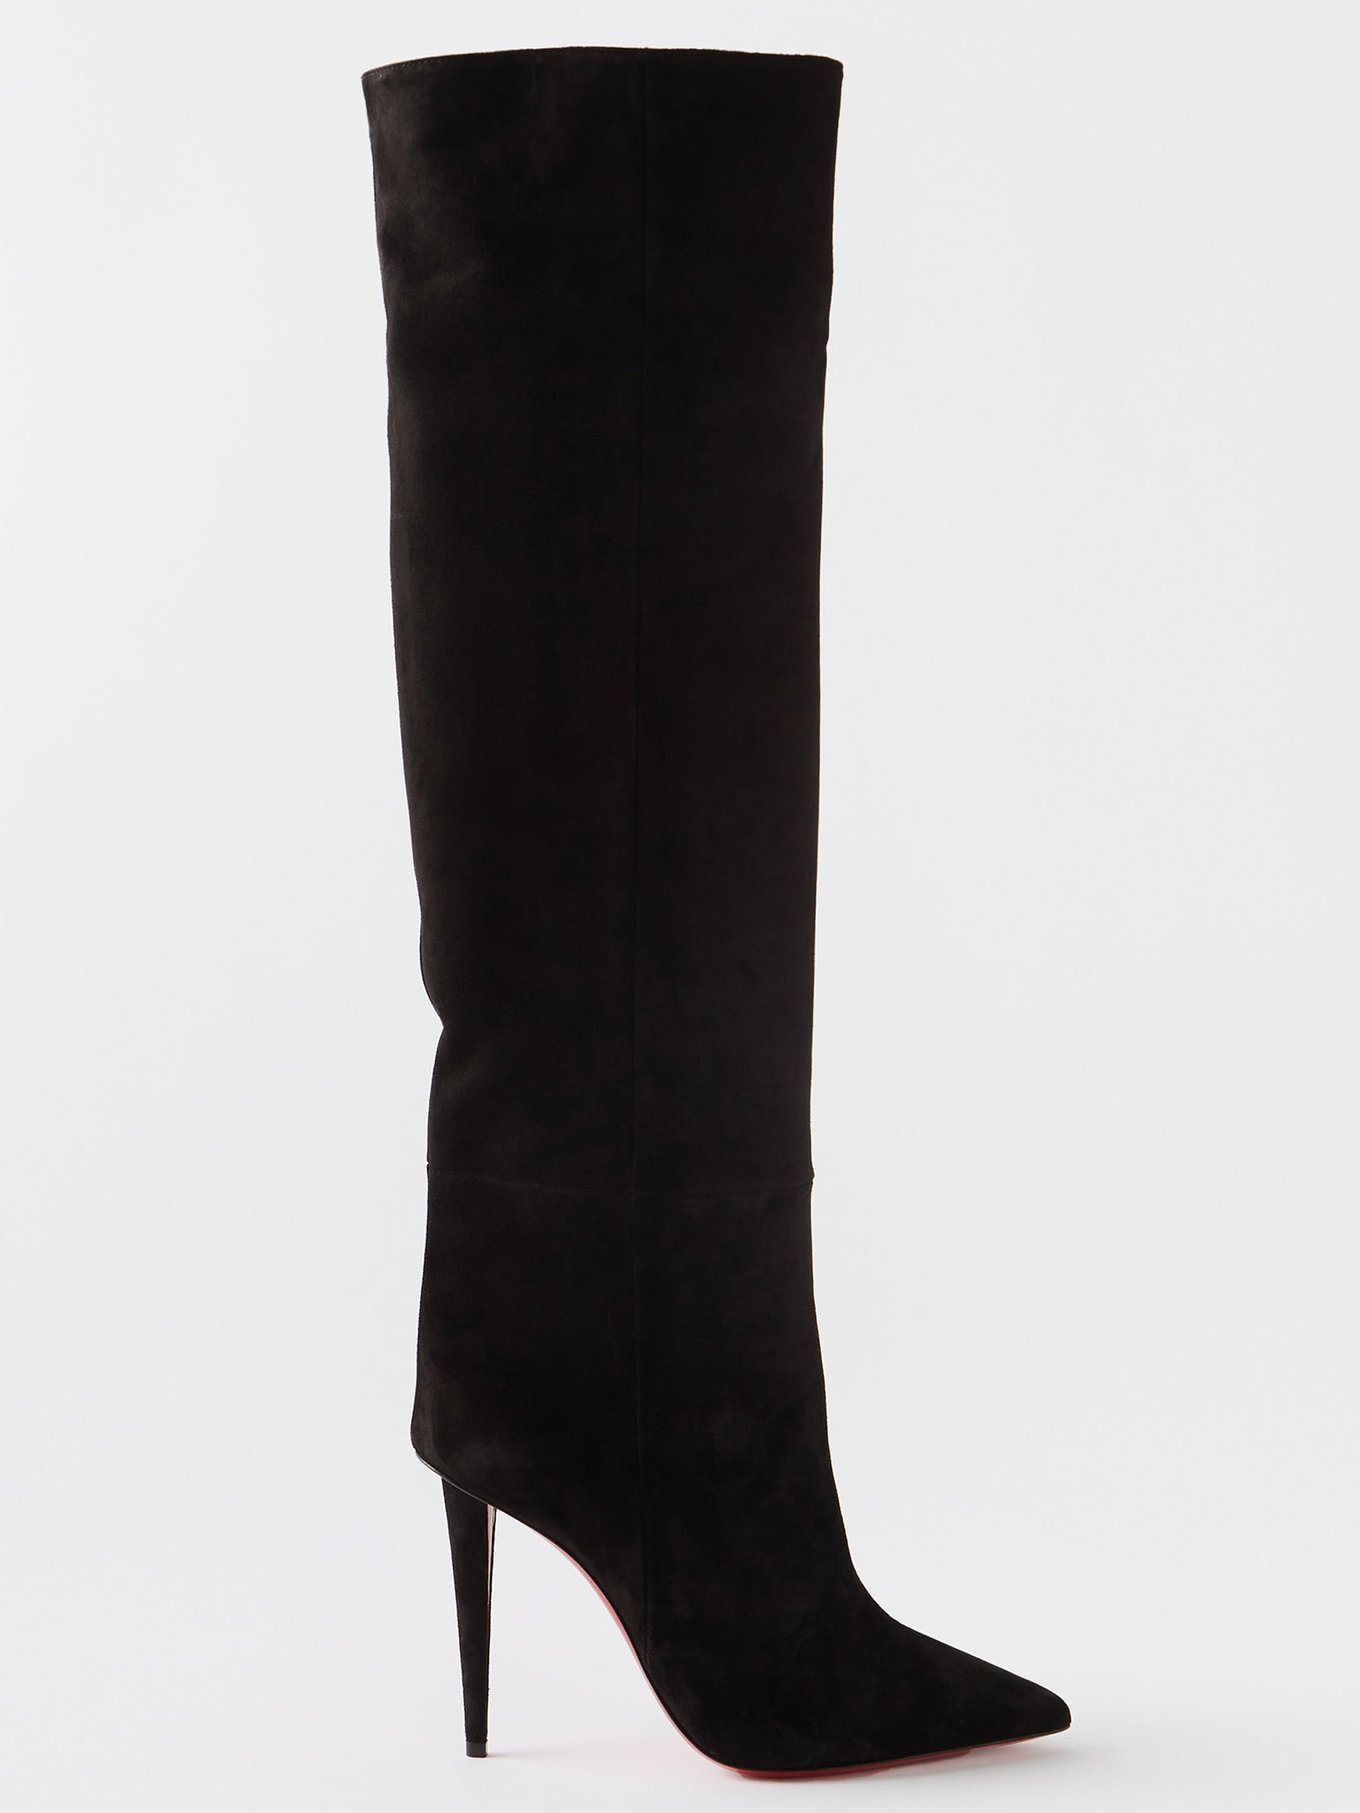 Christian Louboutin Astrilarge Two-Tone Leather Booties